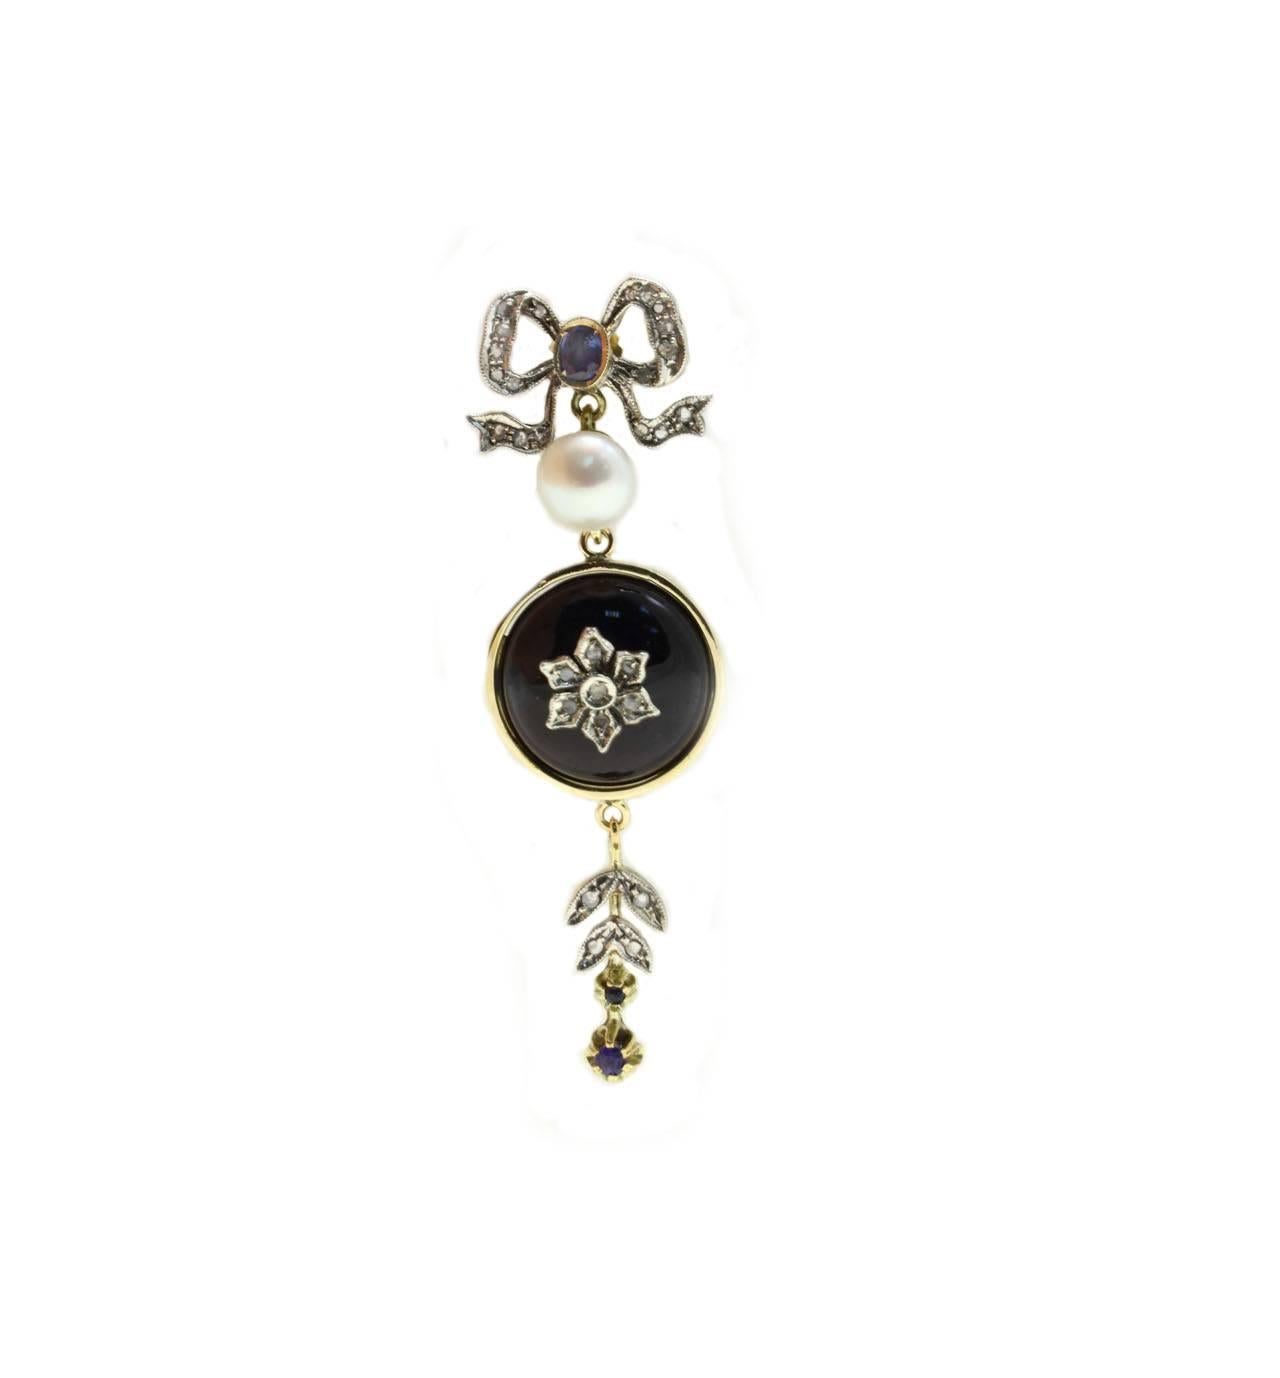 Dangle earrings in 14kt yellow gold and silver composed of a central onyx dome with a flower covered in diamonds on it. On the top there is a diamonds bow embellished with a blue sapphire and a pearl, instead, on the bottom a charm of diamonds and